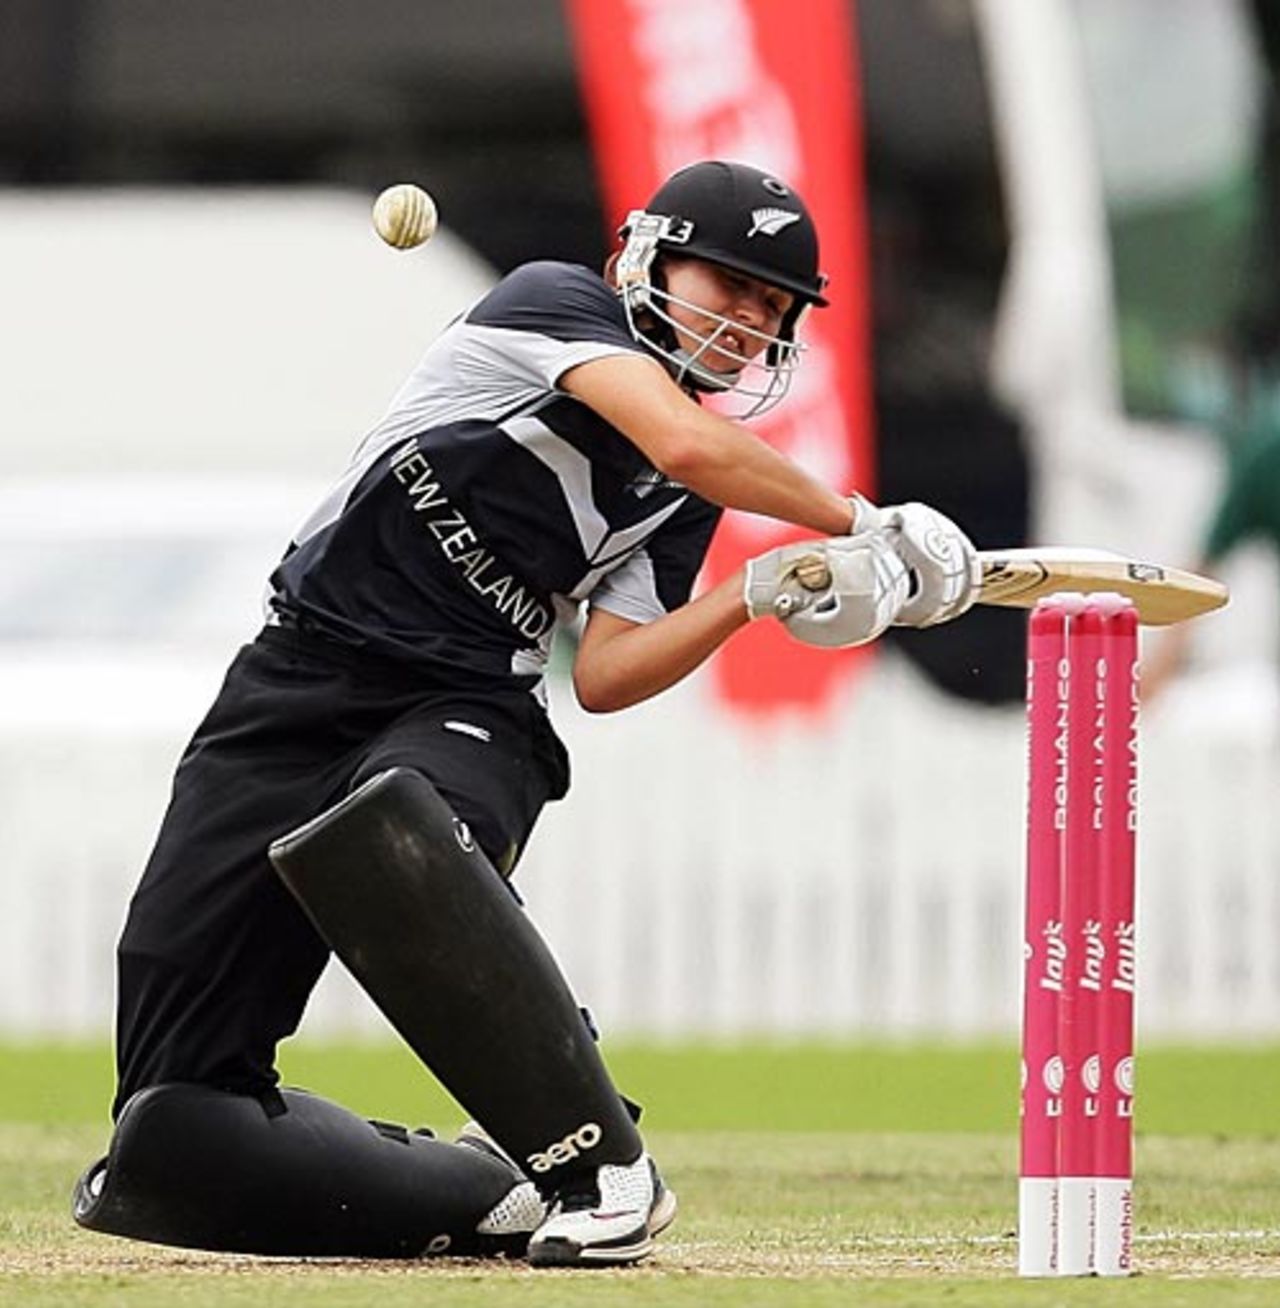 Sara McGlashan tries to pull, New Zealand v South Africa, Group A, women's World Cup, Bradman Oval, Bowral, March 12, 2009